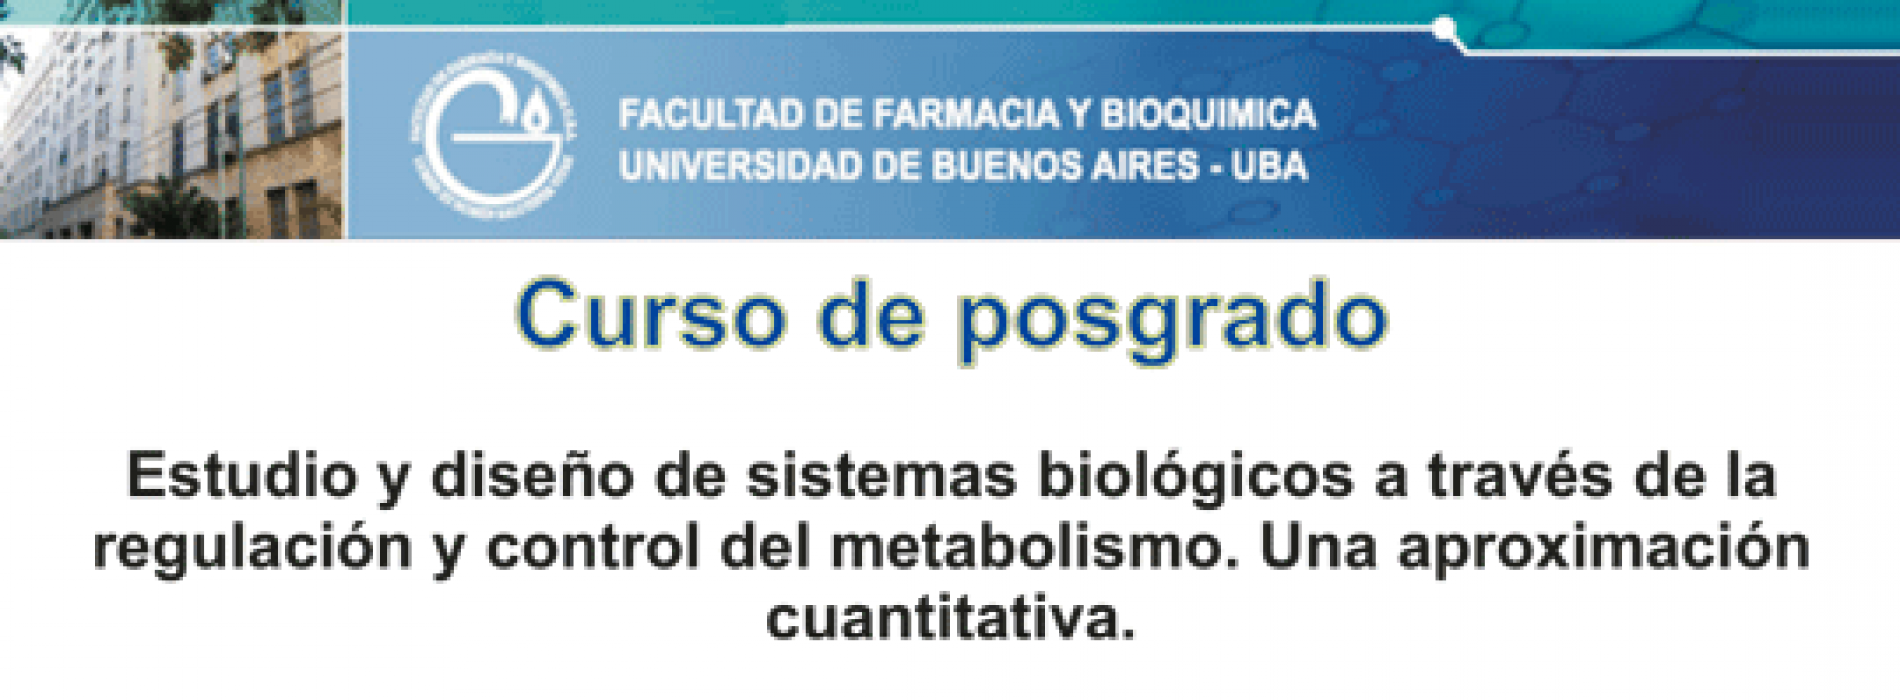 Postgraduate course "study and design of biological systems through the regulation and control of metabolism. A quantitative approach"